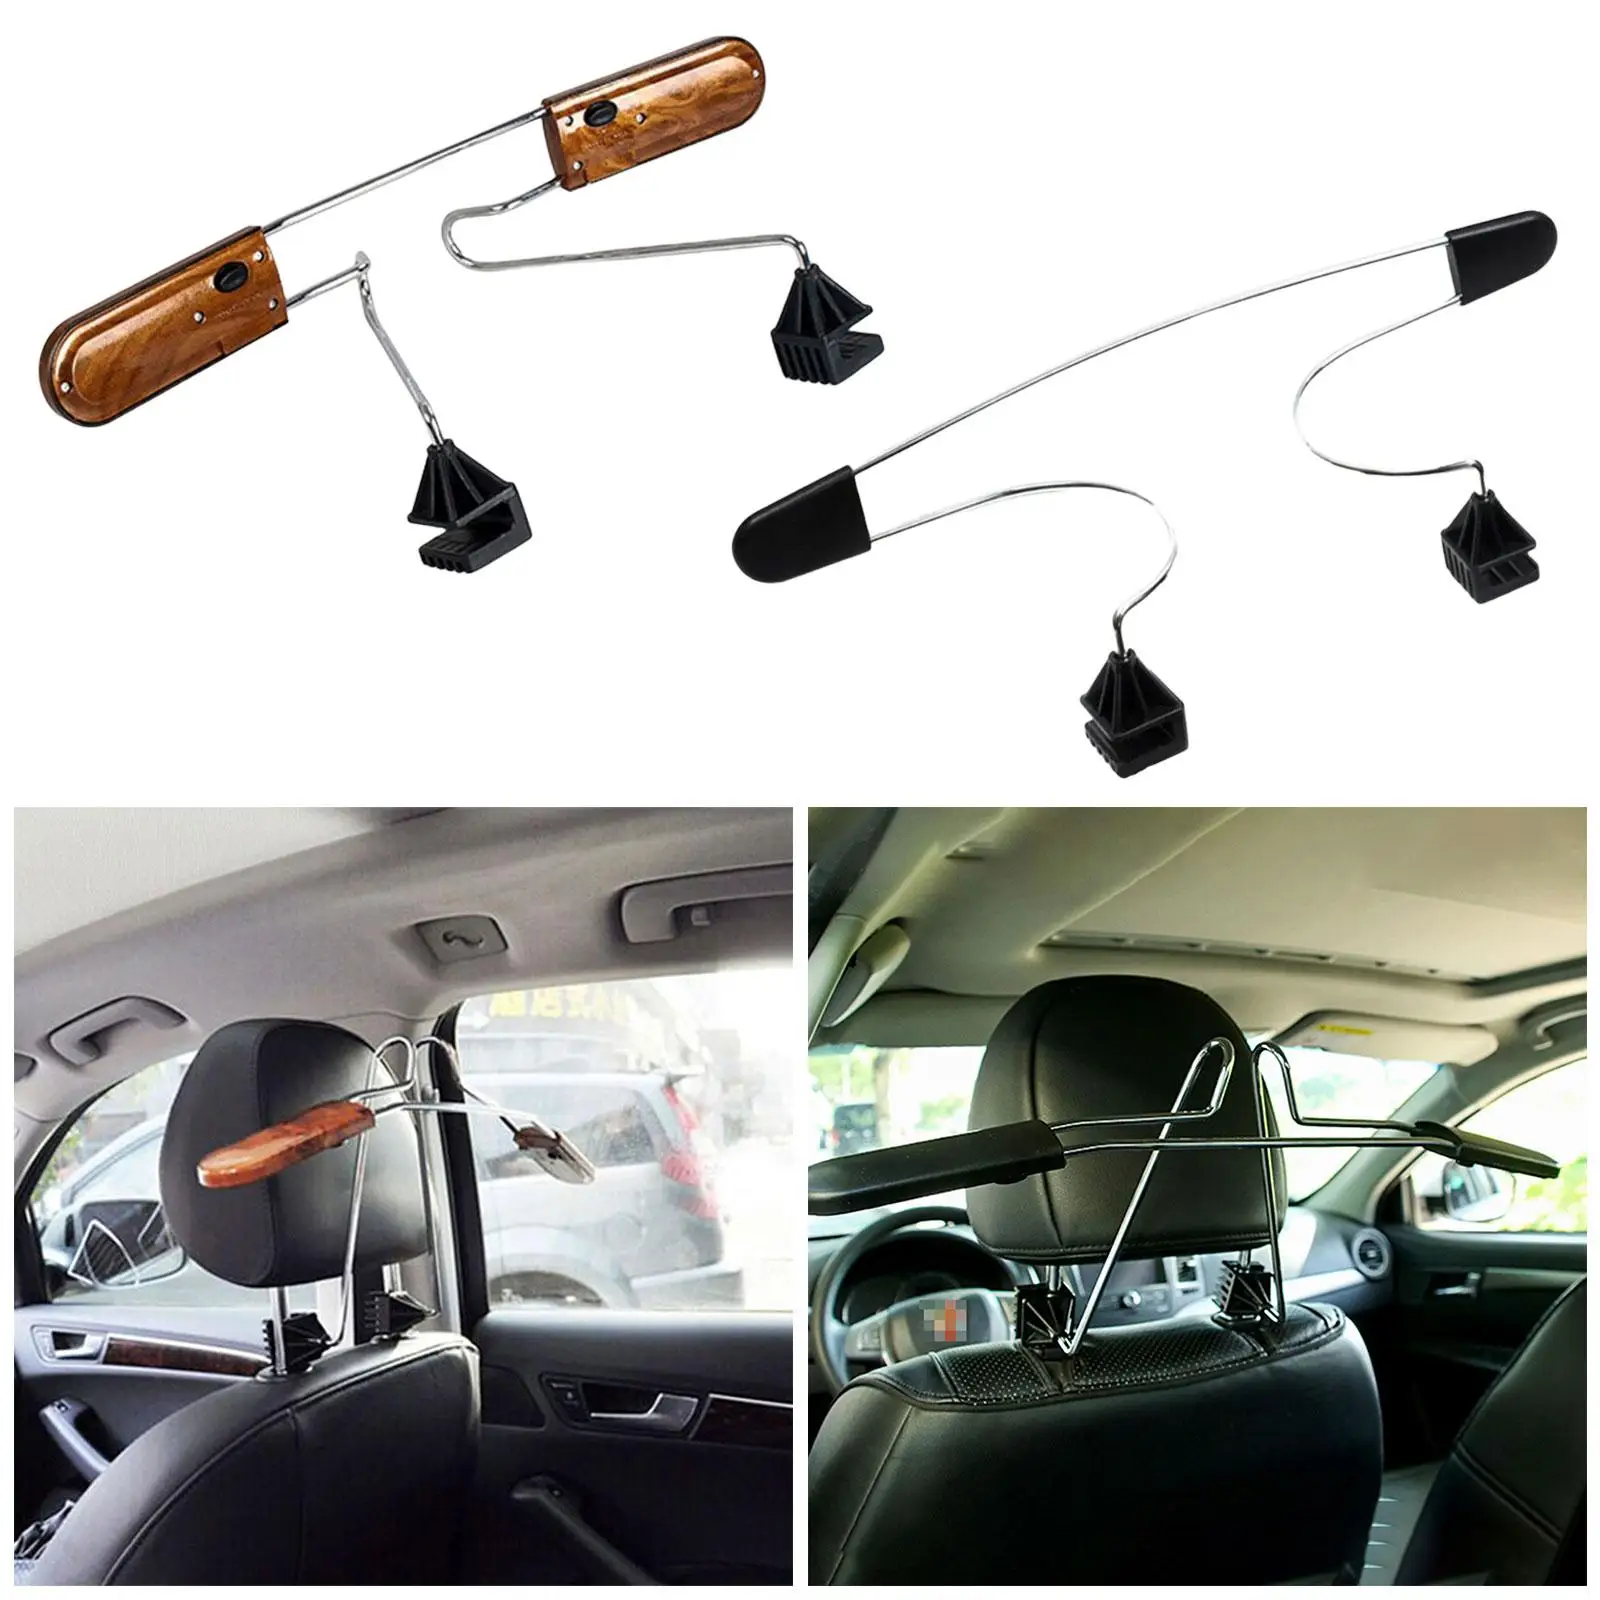 Adjustable Vehicle Car Jacket Suit Coat Hanger ,Easy to Assemble and Install